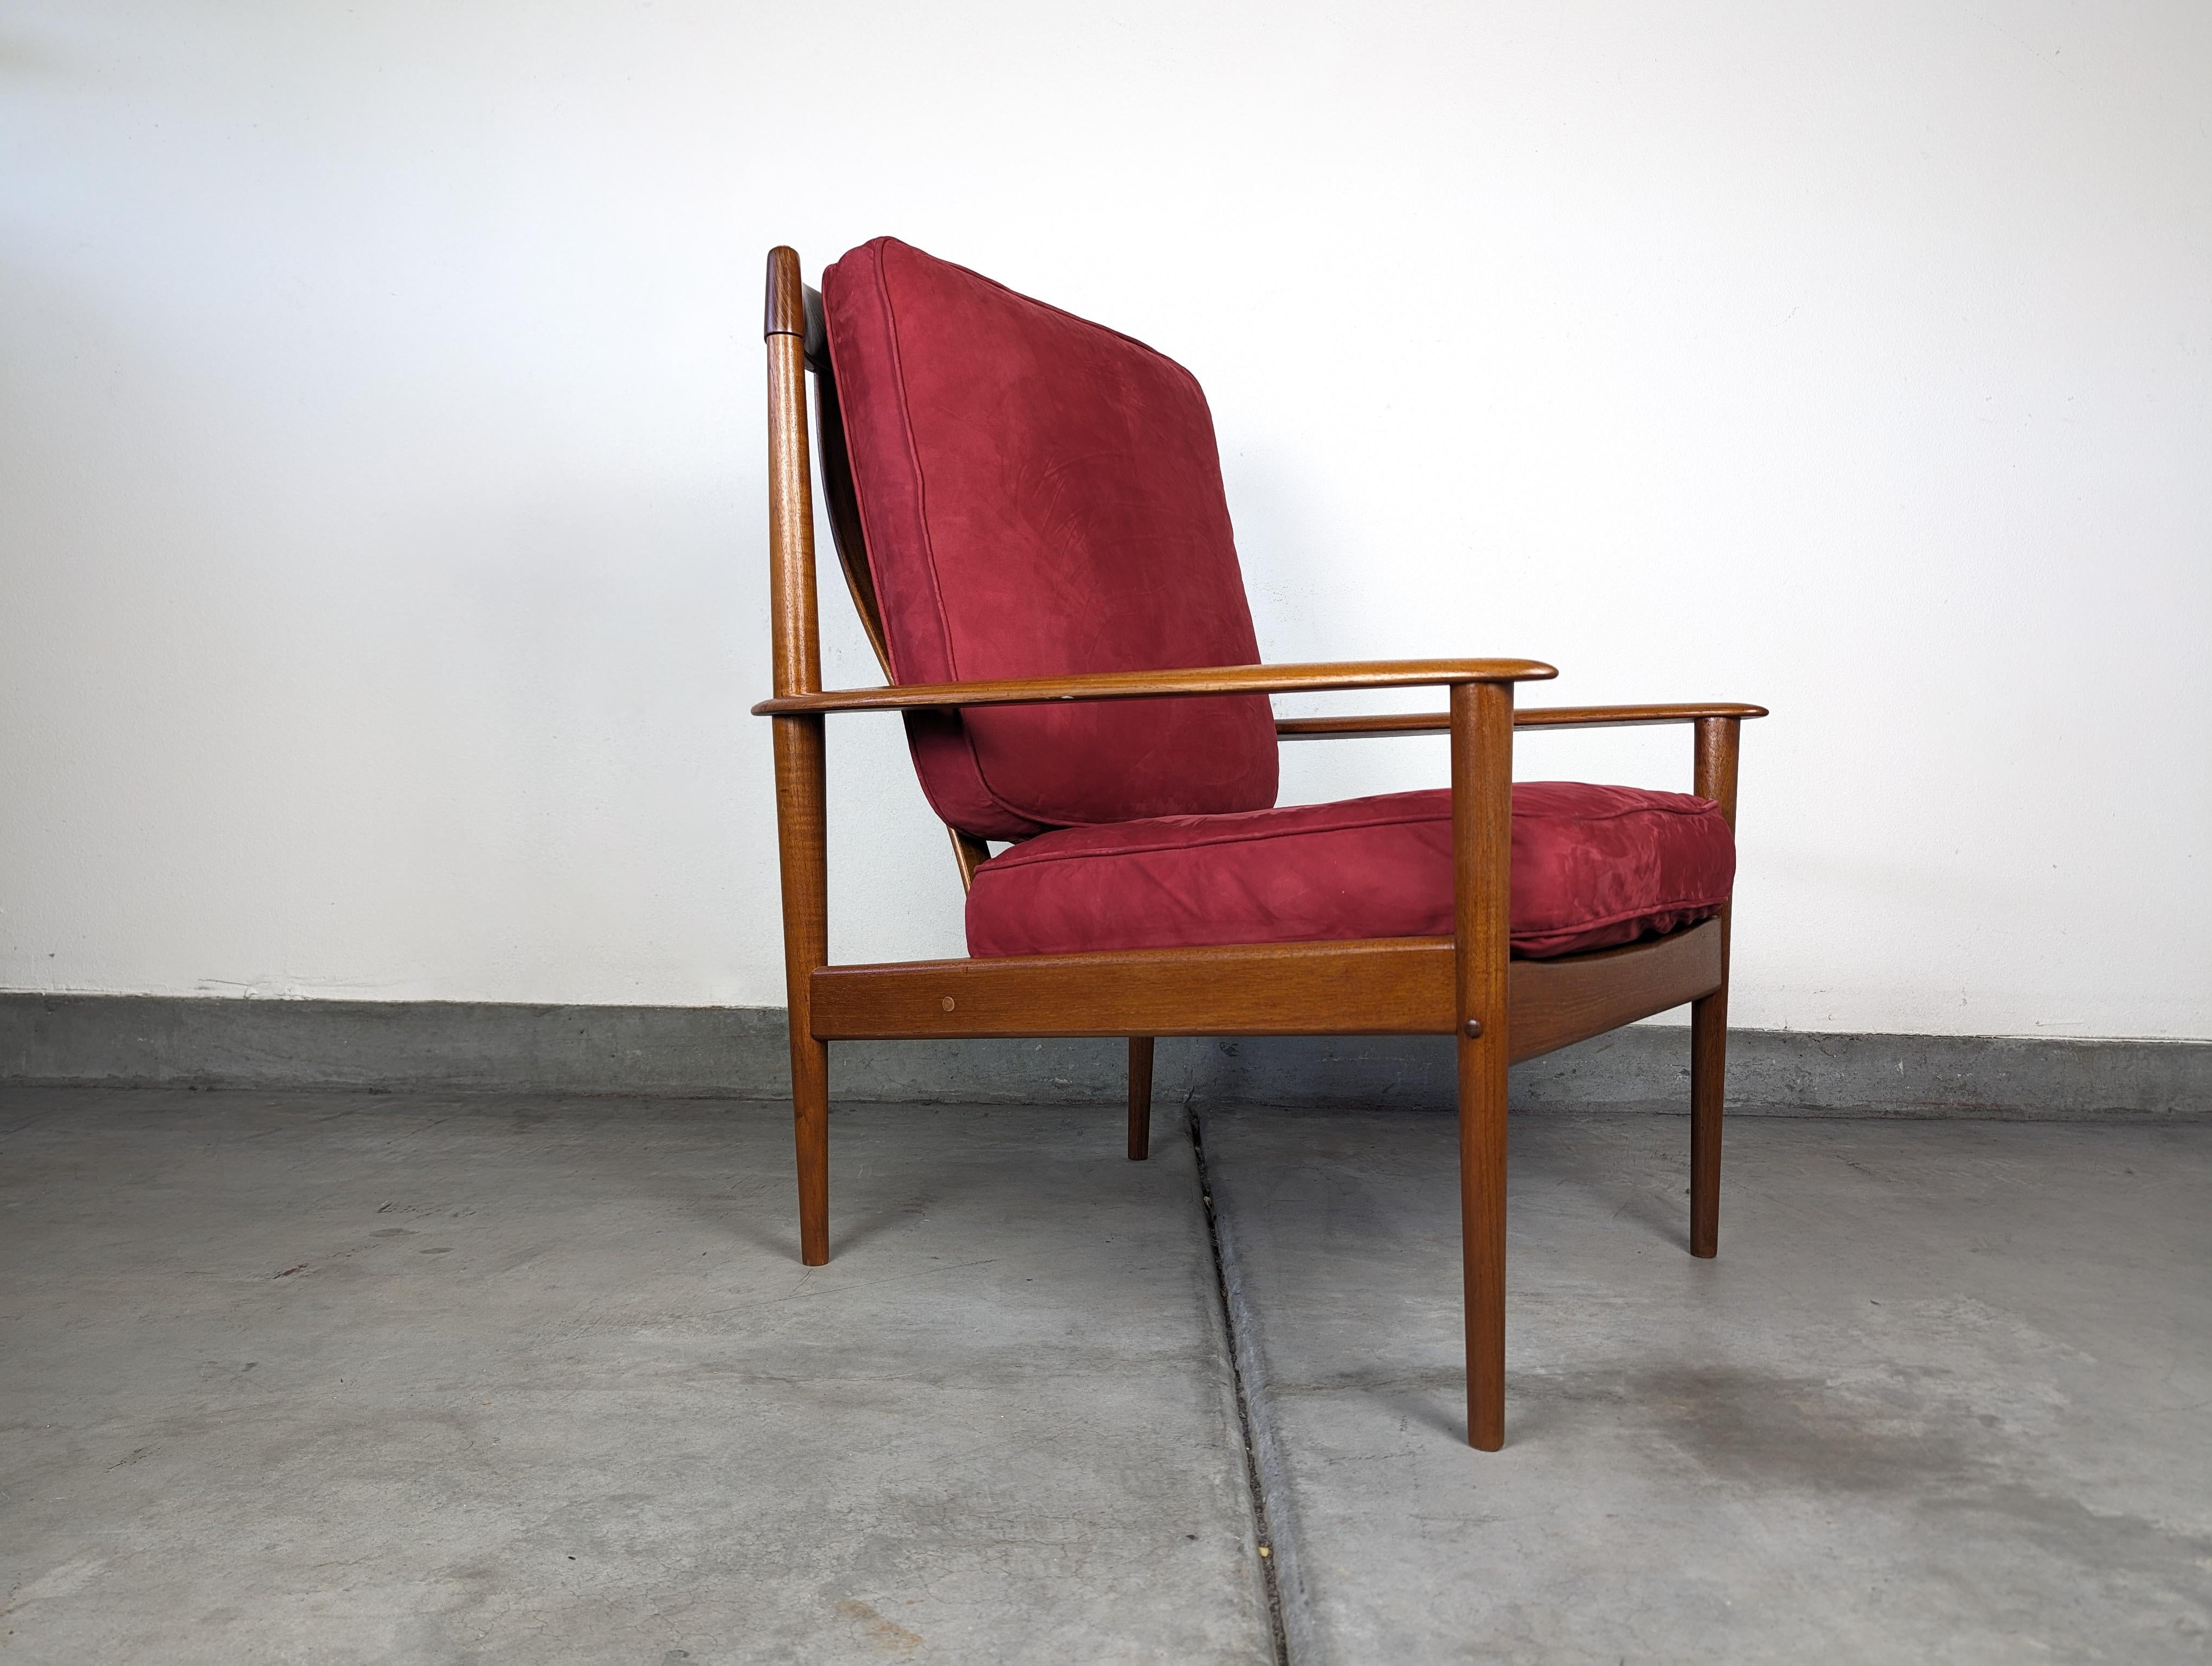 Mid-Century Modern Lounge Chair by Grete Jalk, PJ56 Highback Model, c1960s In Excellent Condition For Sale In Chino Hills, CA